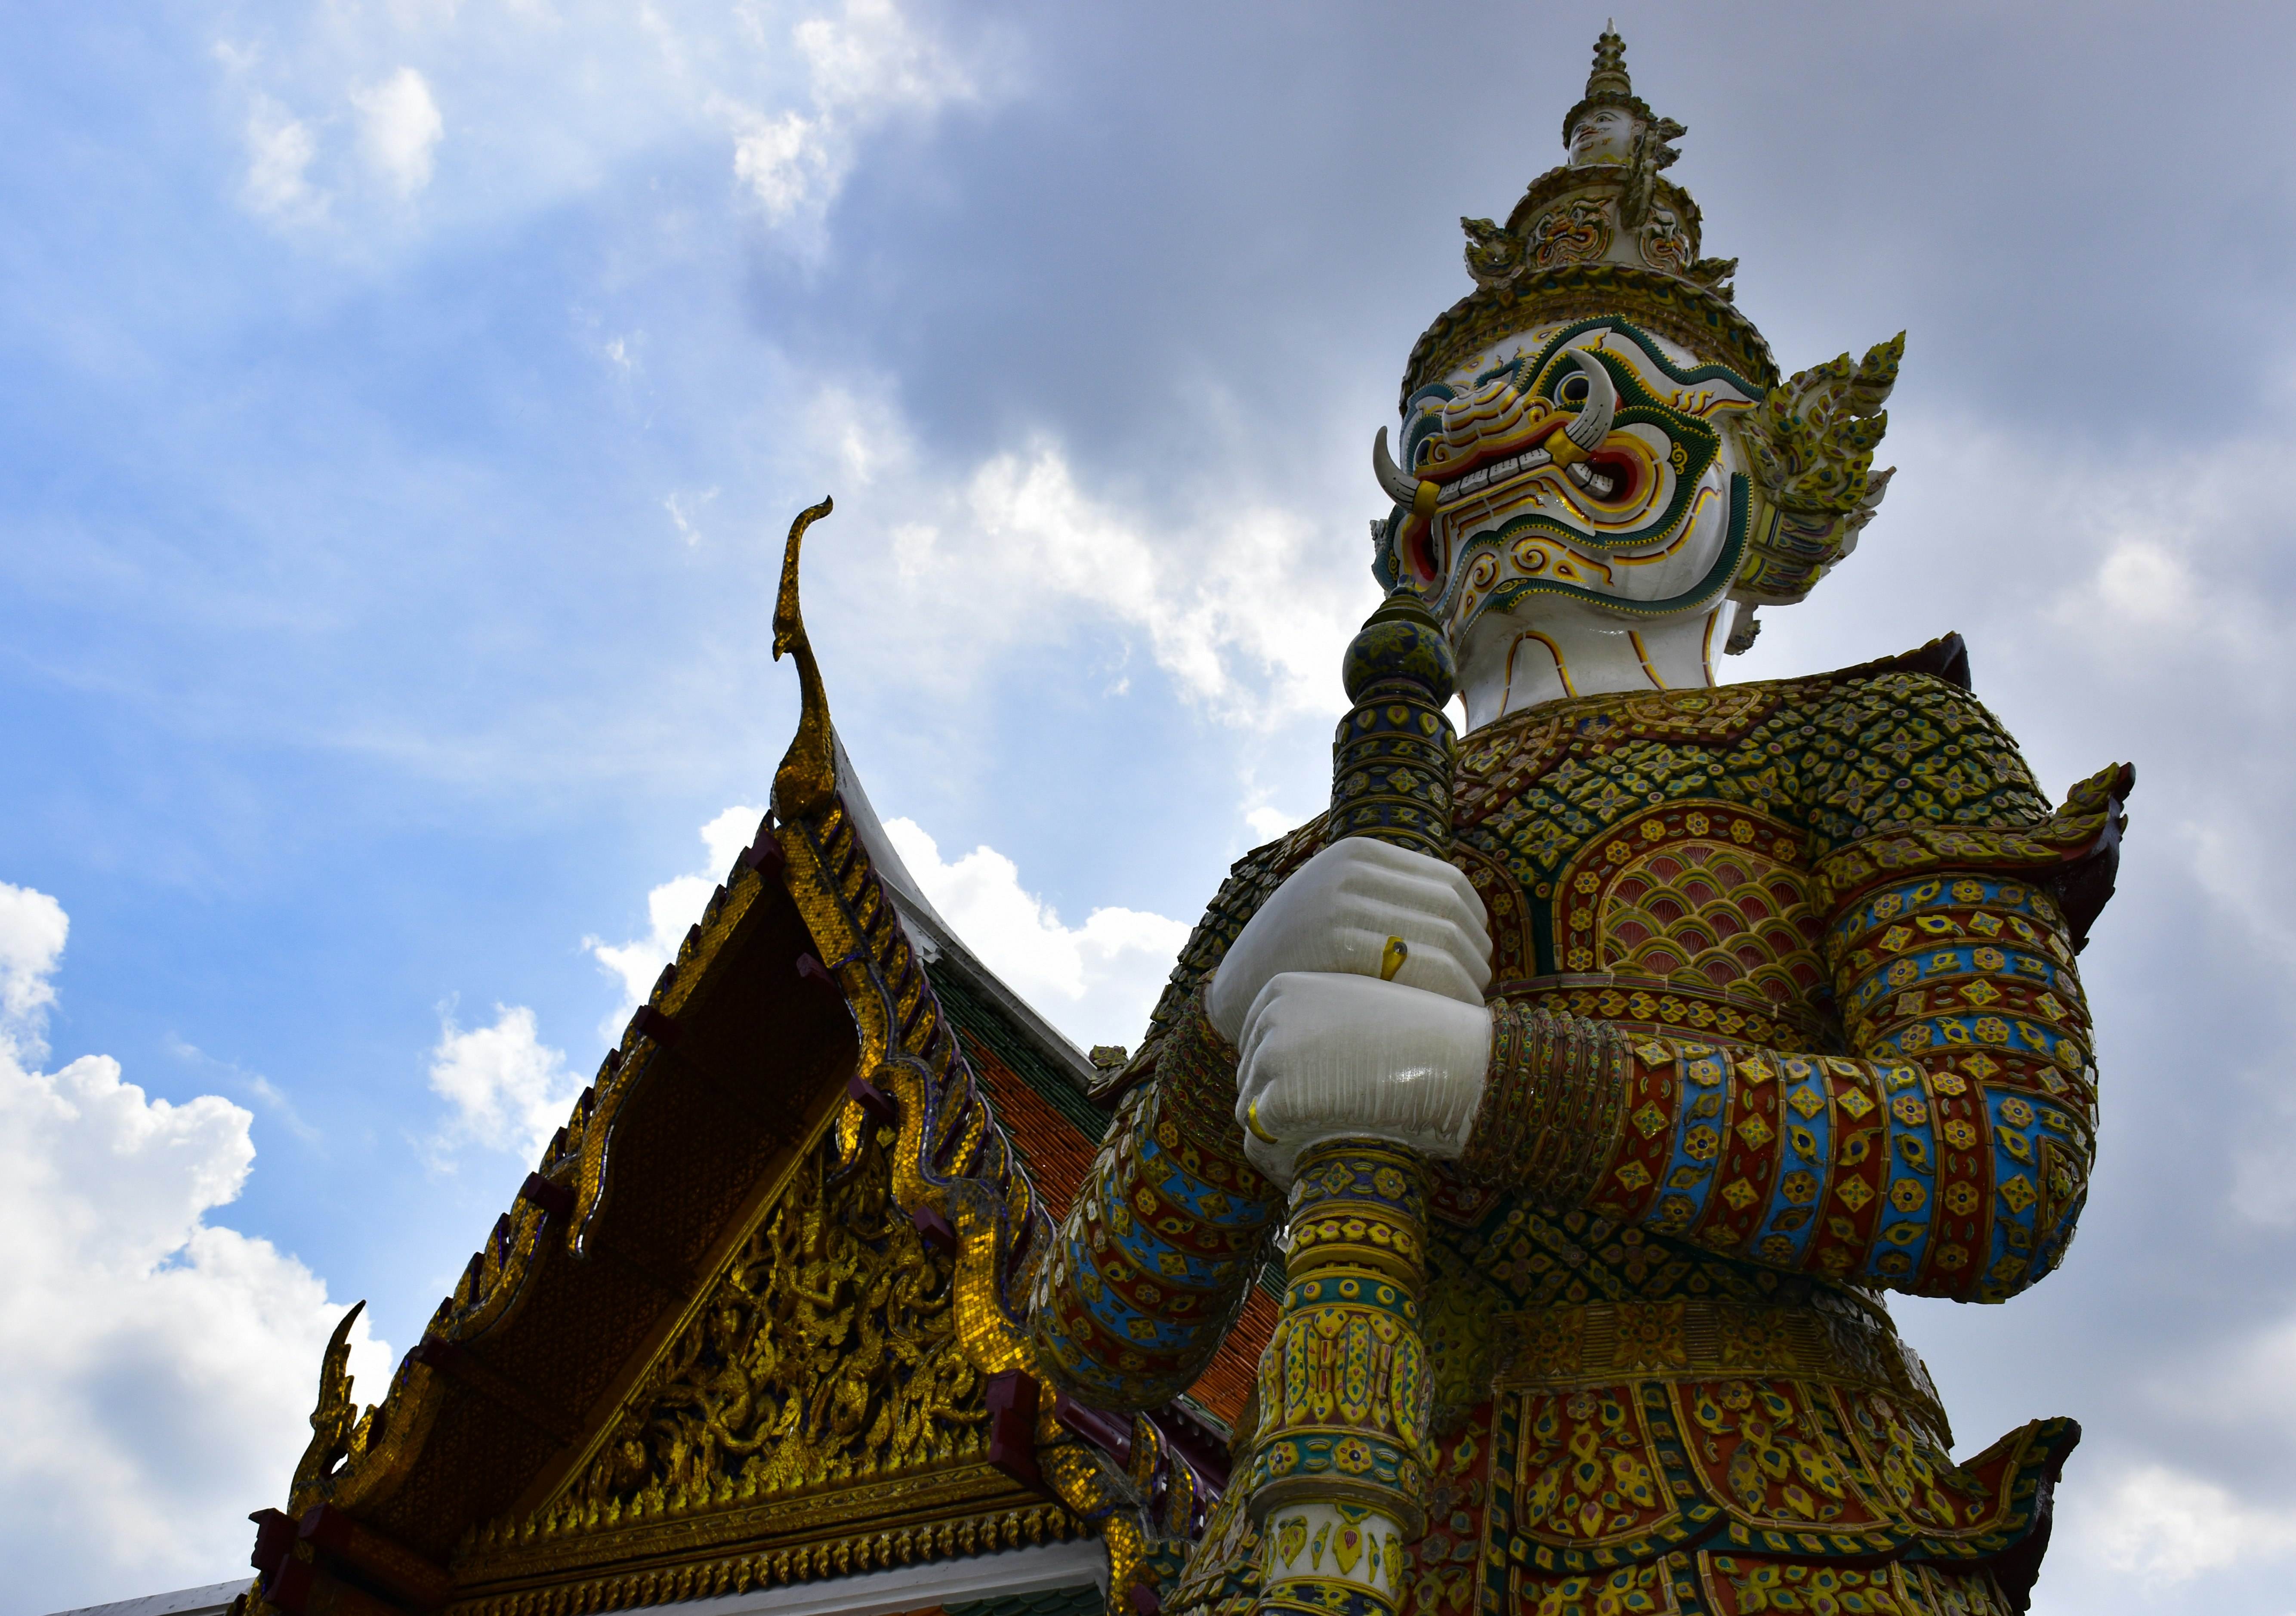 Thailand traditional building and statue during daytime